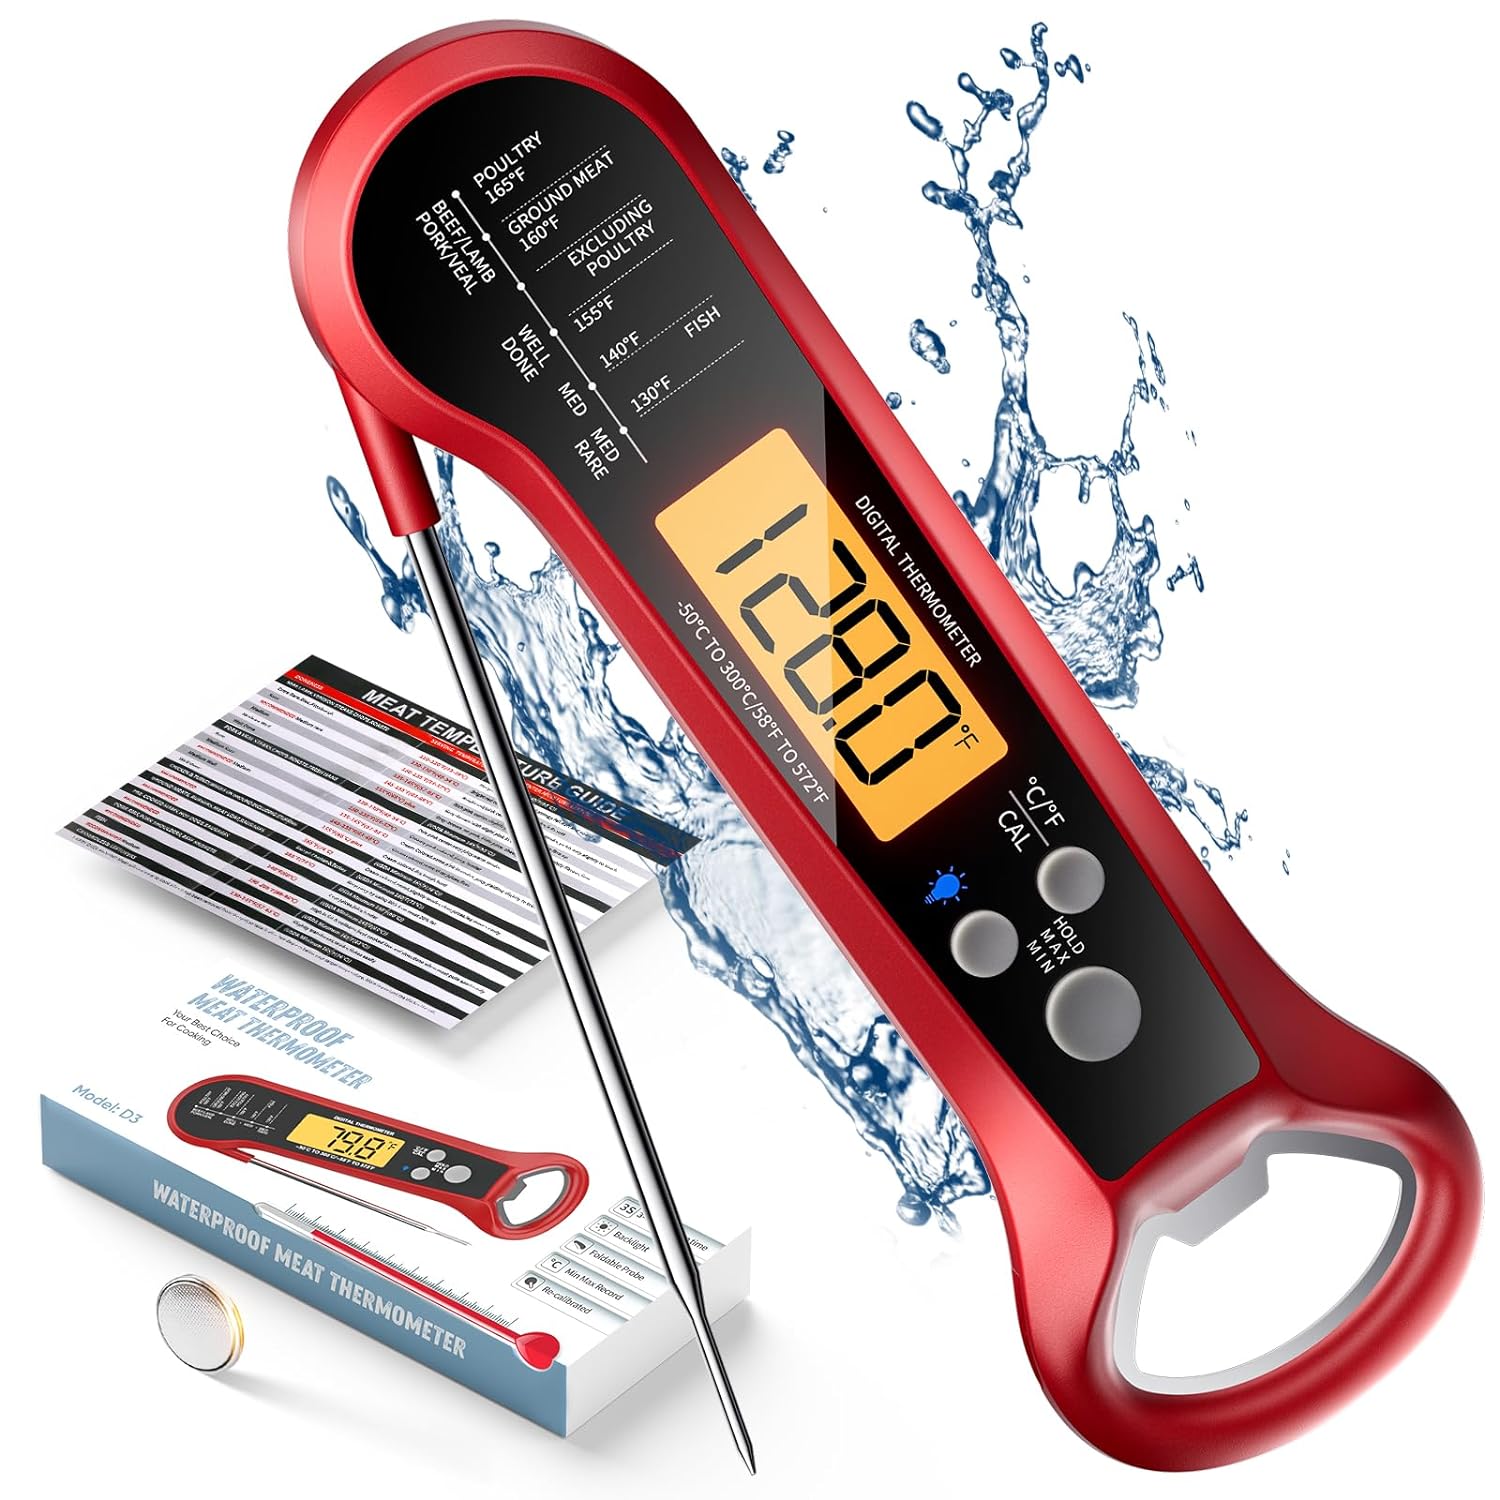 Meat Thermometer Digital, Waterproof Instant Read Meat Thermometers for Grilling and Cooking. Food Thermometer, Kitchen Gadgets, Accessories with Bottle Cap Opener for Kitchen, BBQ, Grill…